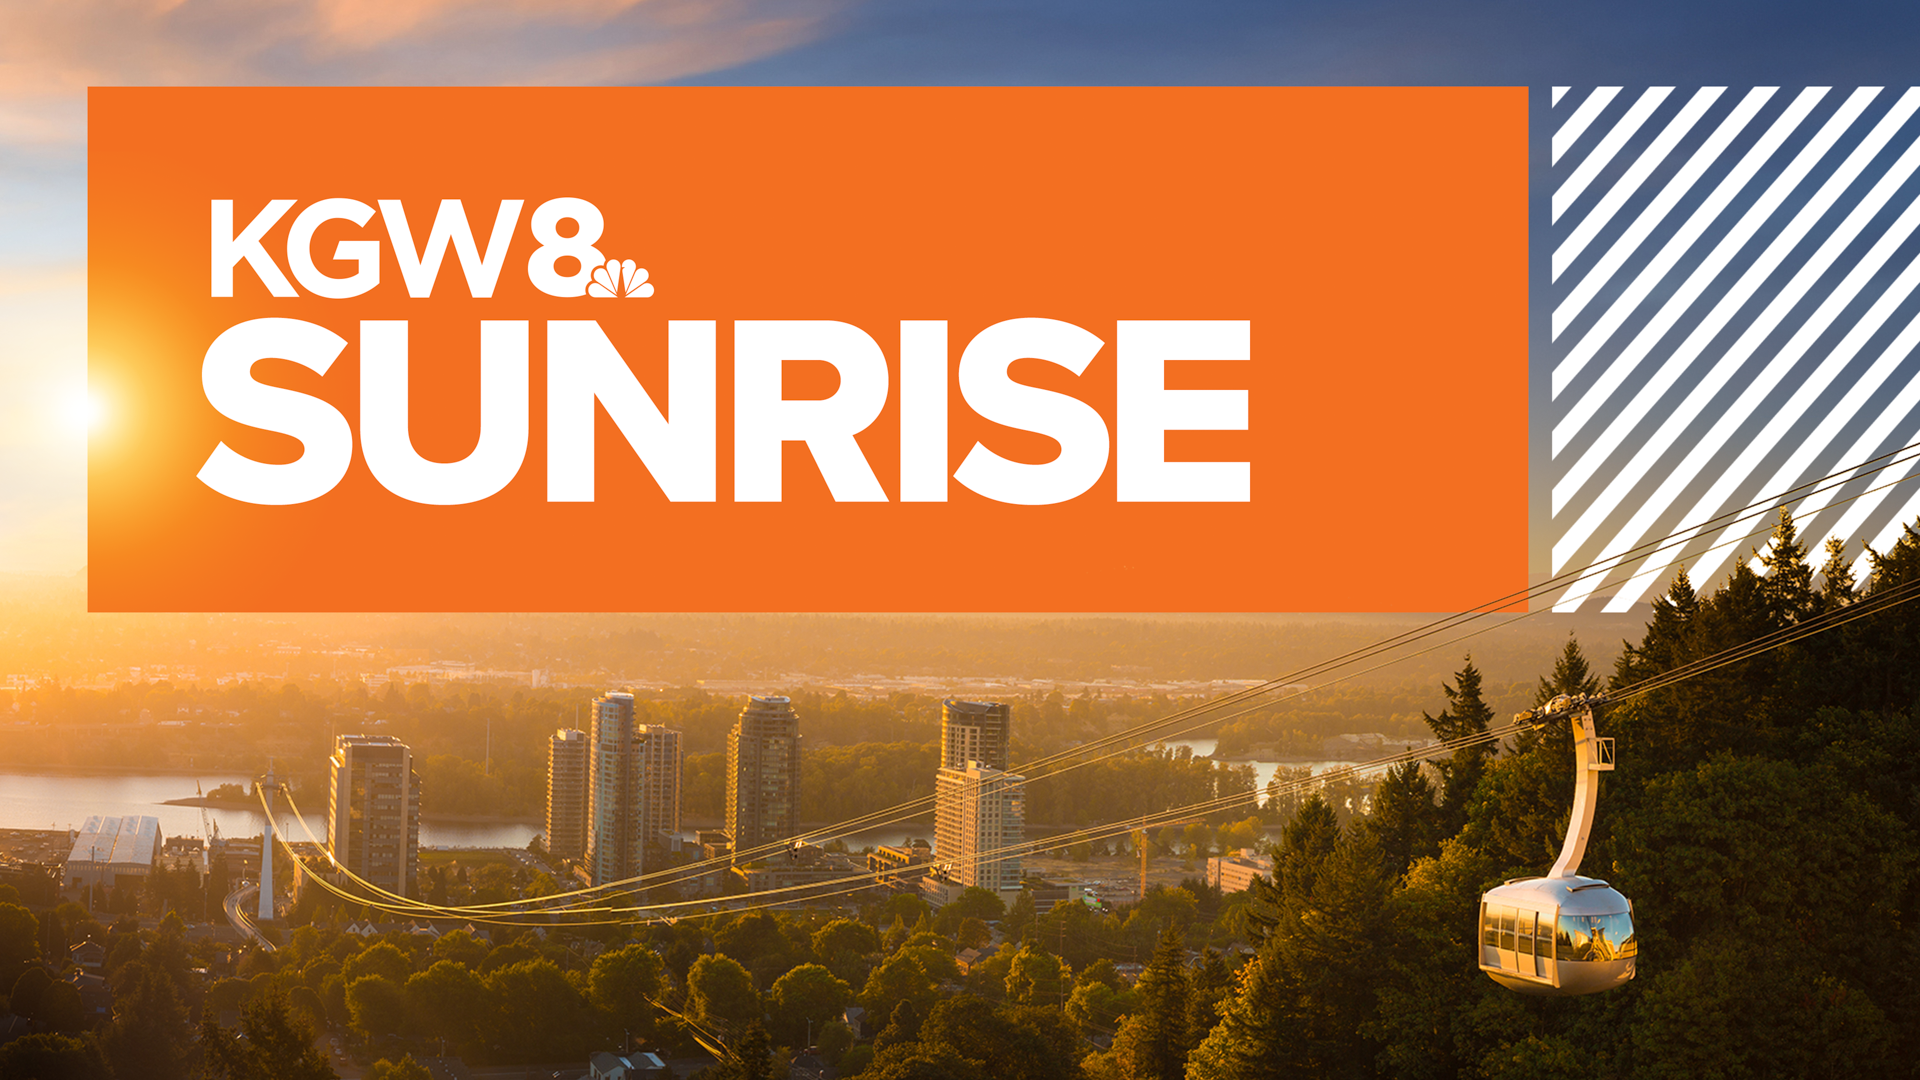 KGW Top Stories: Sunrise, Wednesday, January 25, 2023